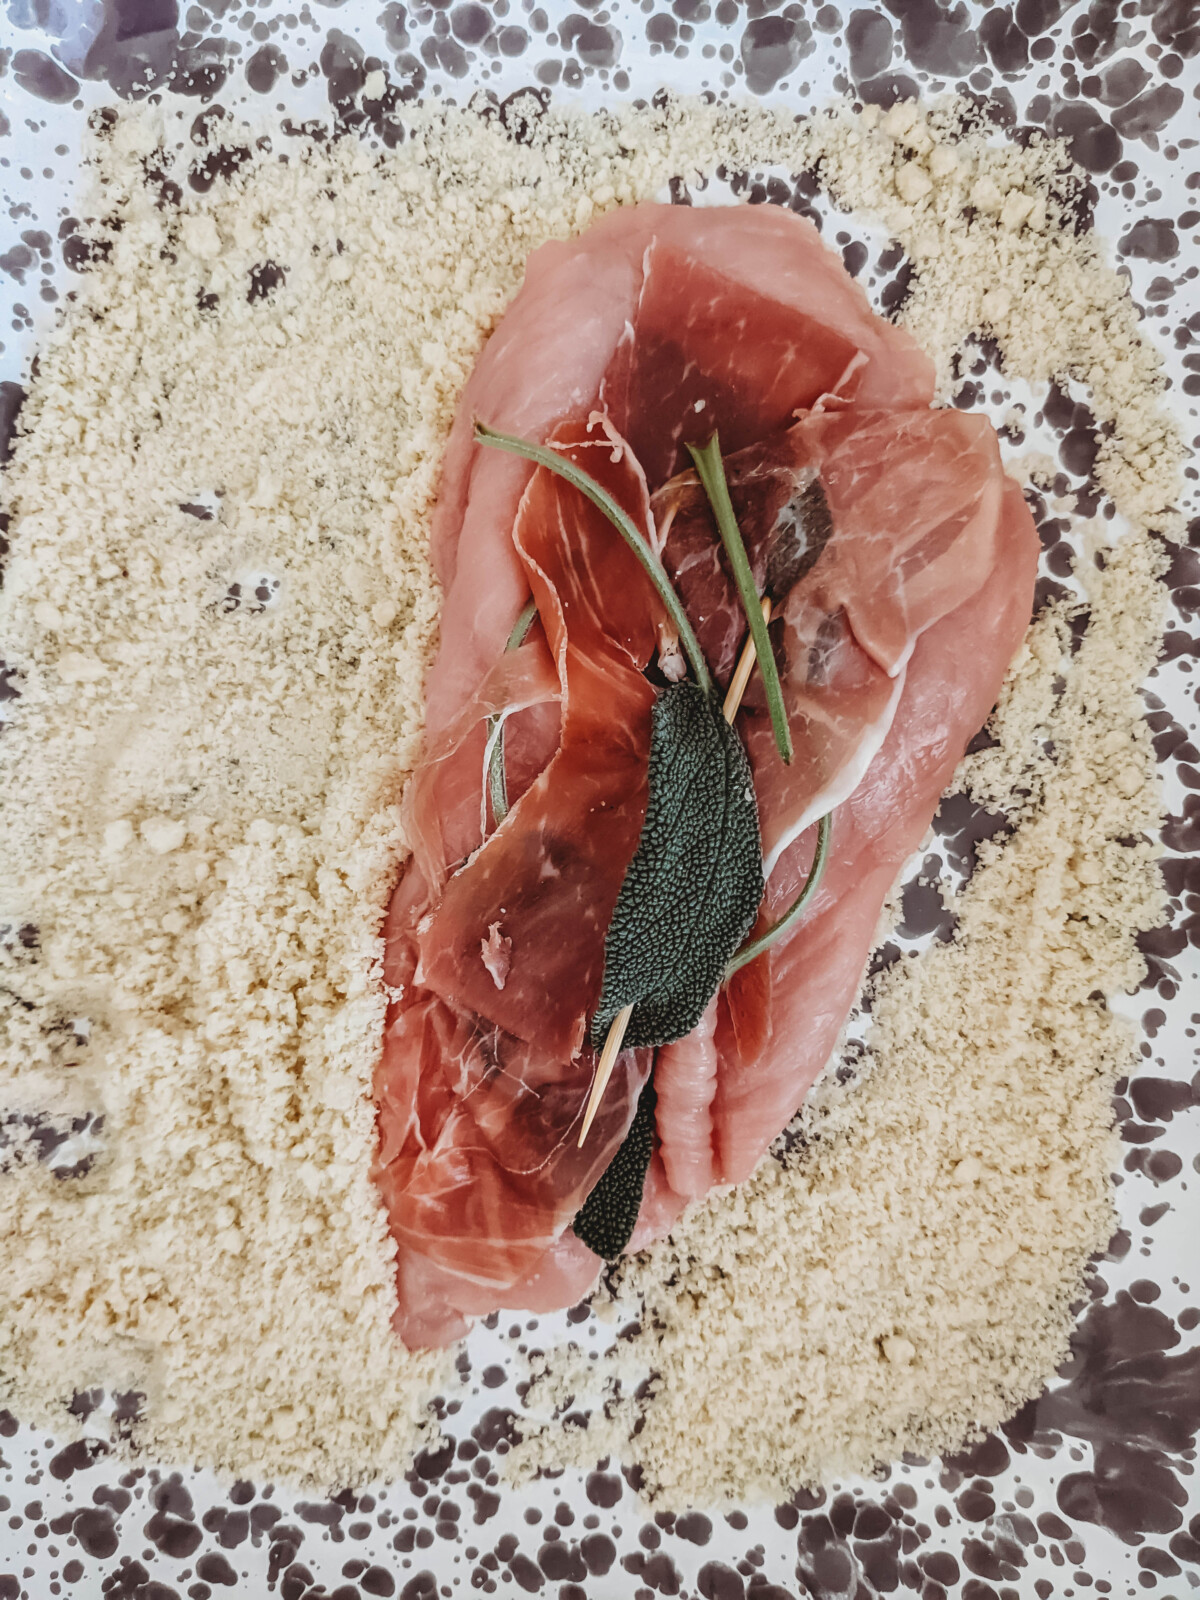 veal prepped for saltimbocca in almond flour